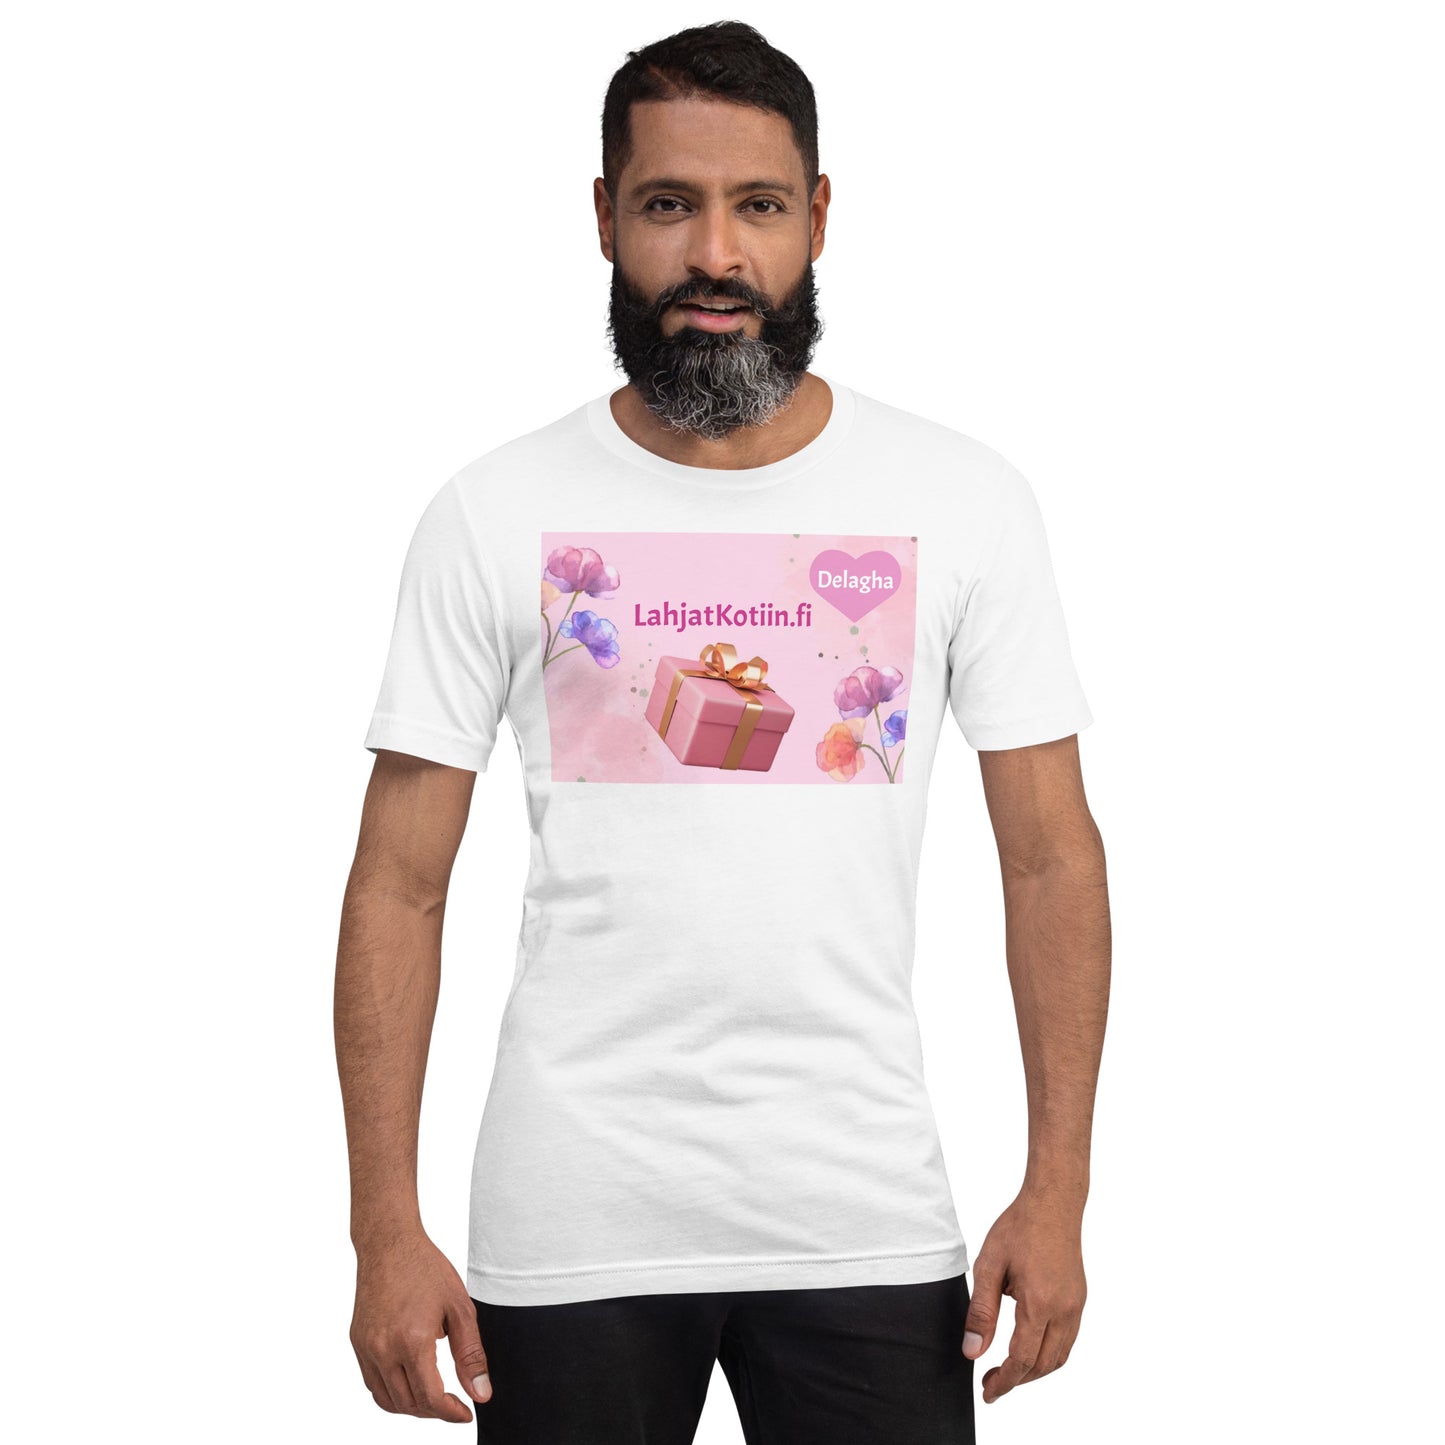 "Delagha IN THE BACKGROUND" t-shirt